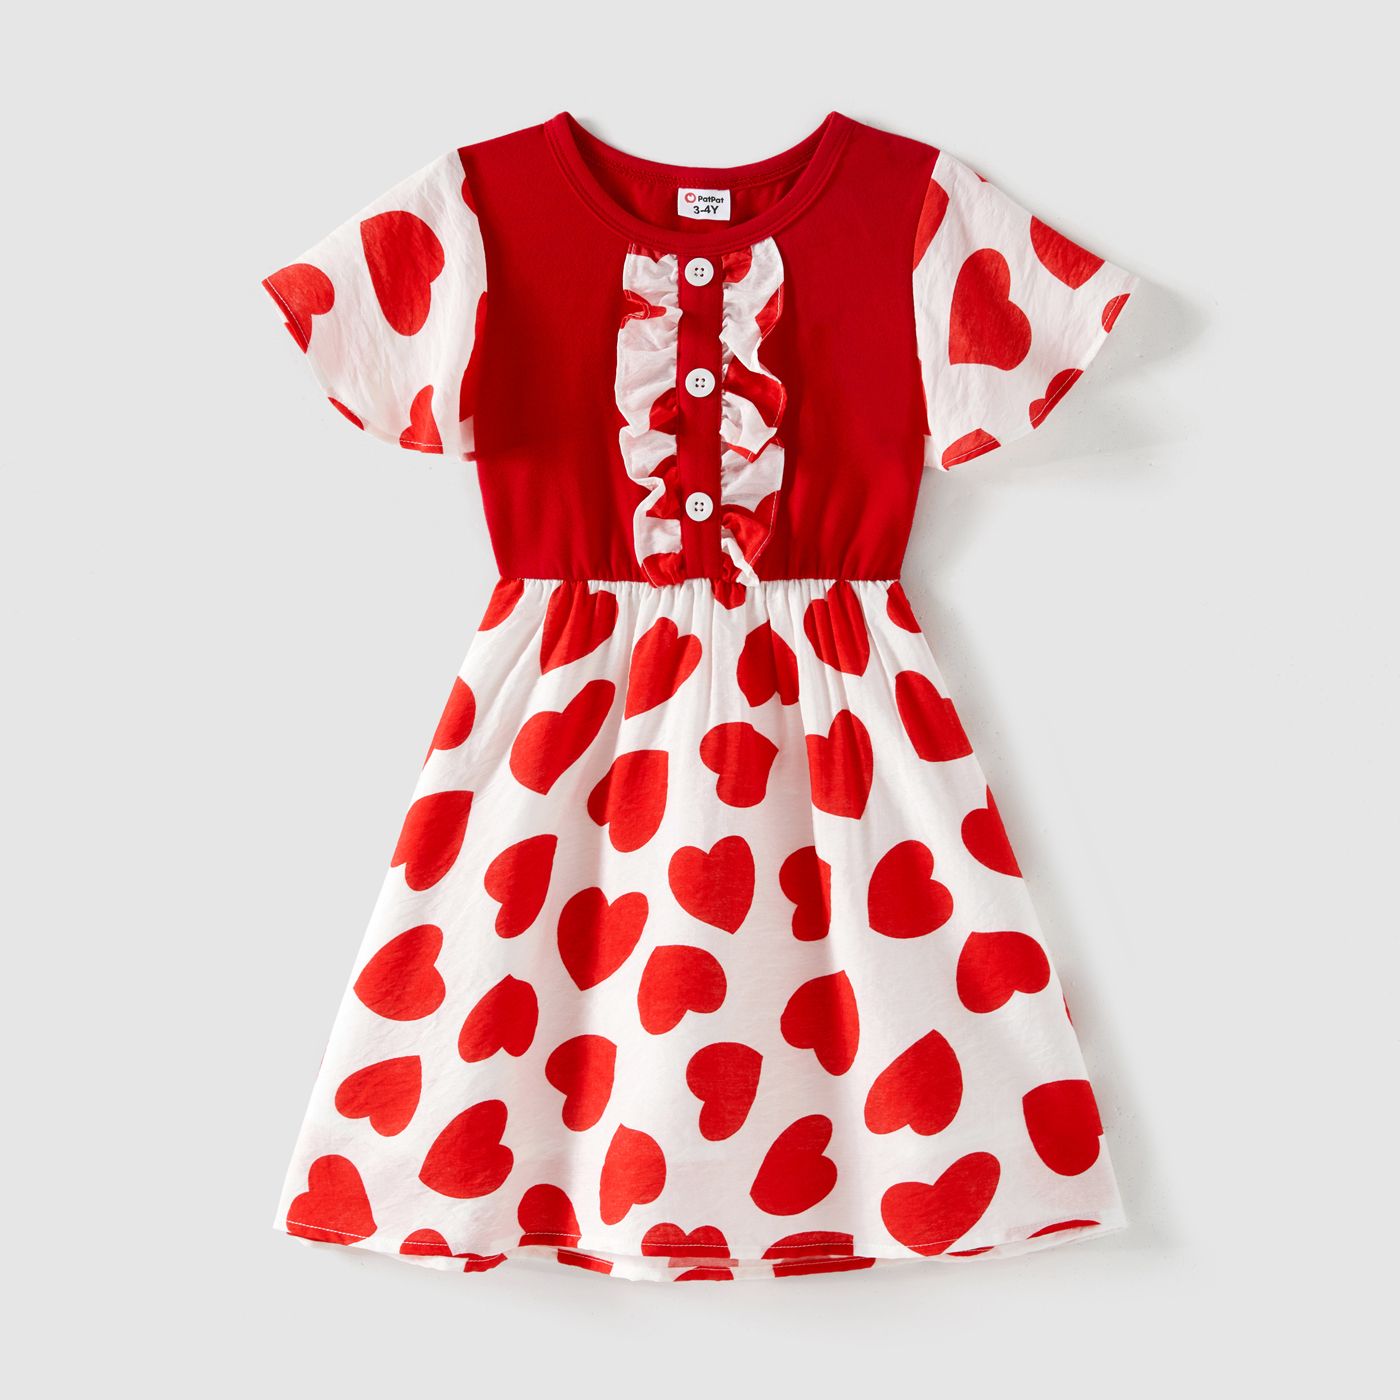 Family Matching 95% Cotton Short-sleeve Colorblock T-shirts And Allover Heart Print Dresses Sets